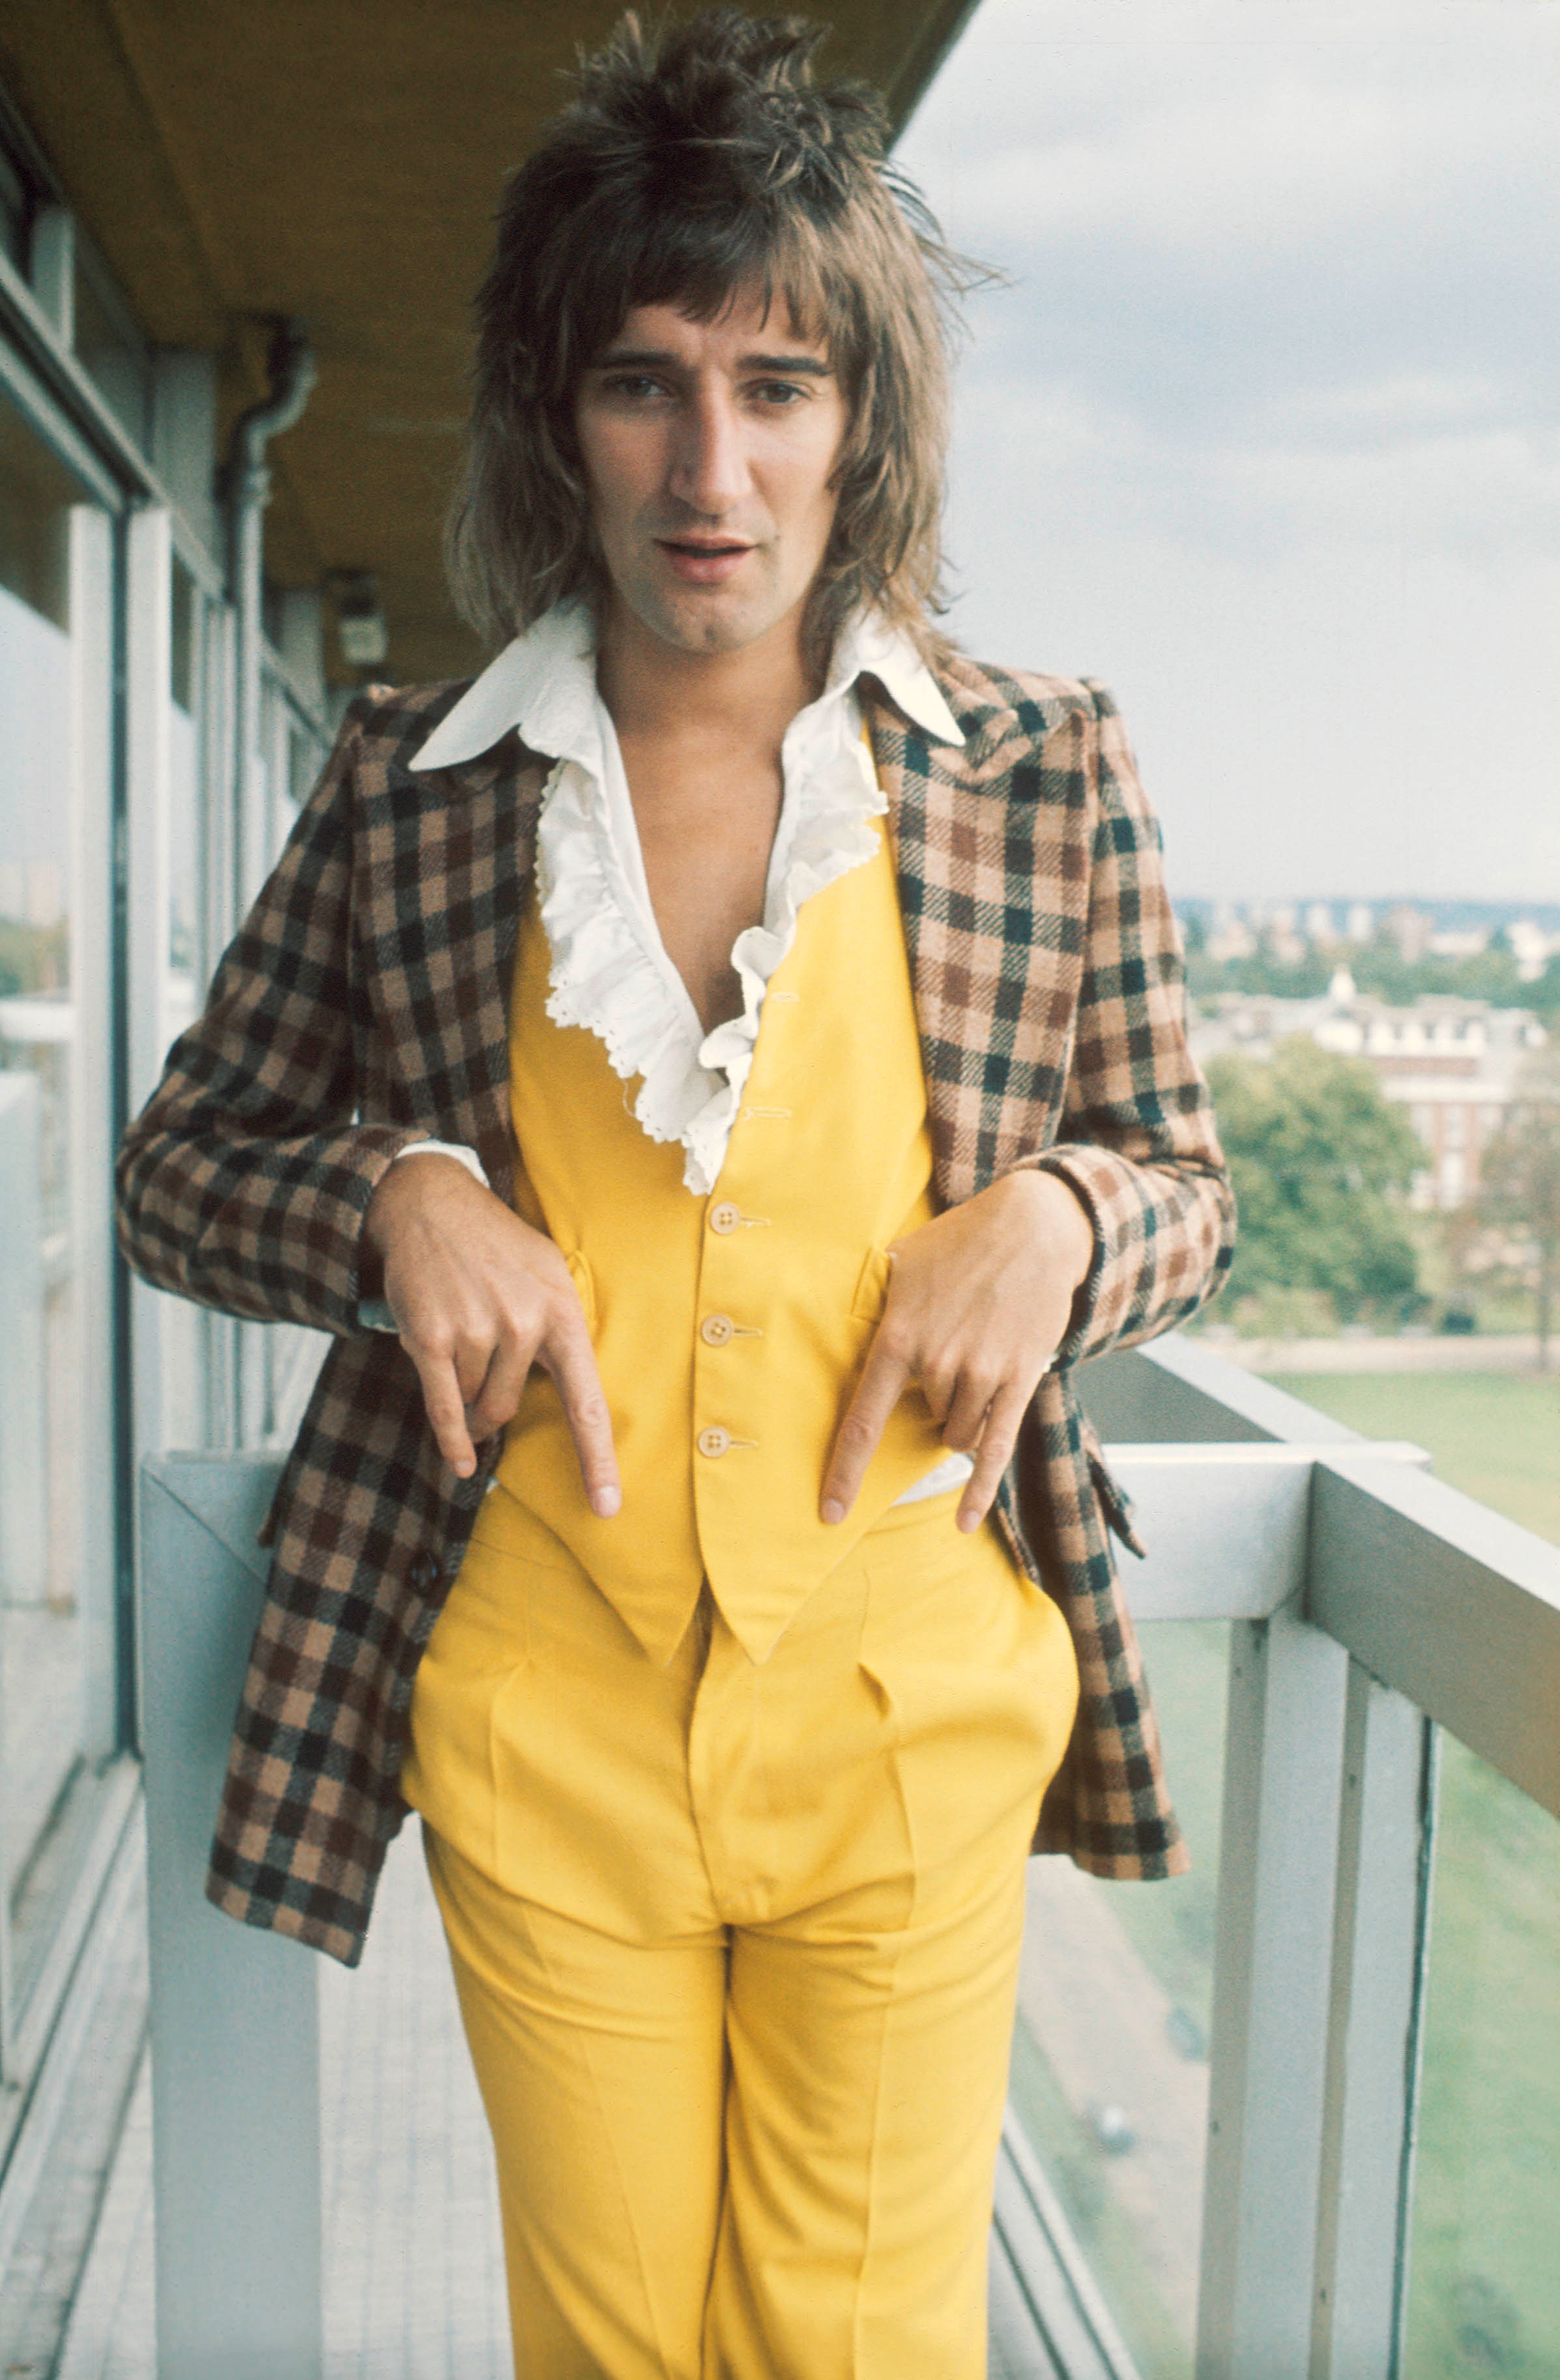 His career has spanned over six decades (pictured here in 1974)